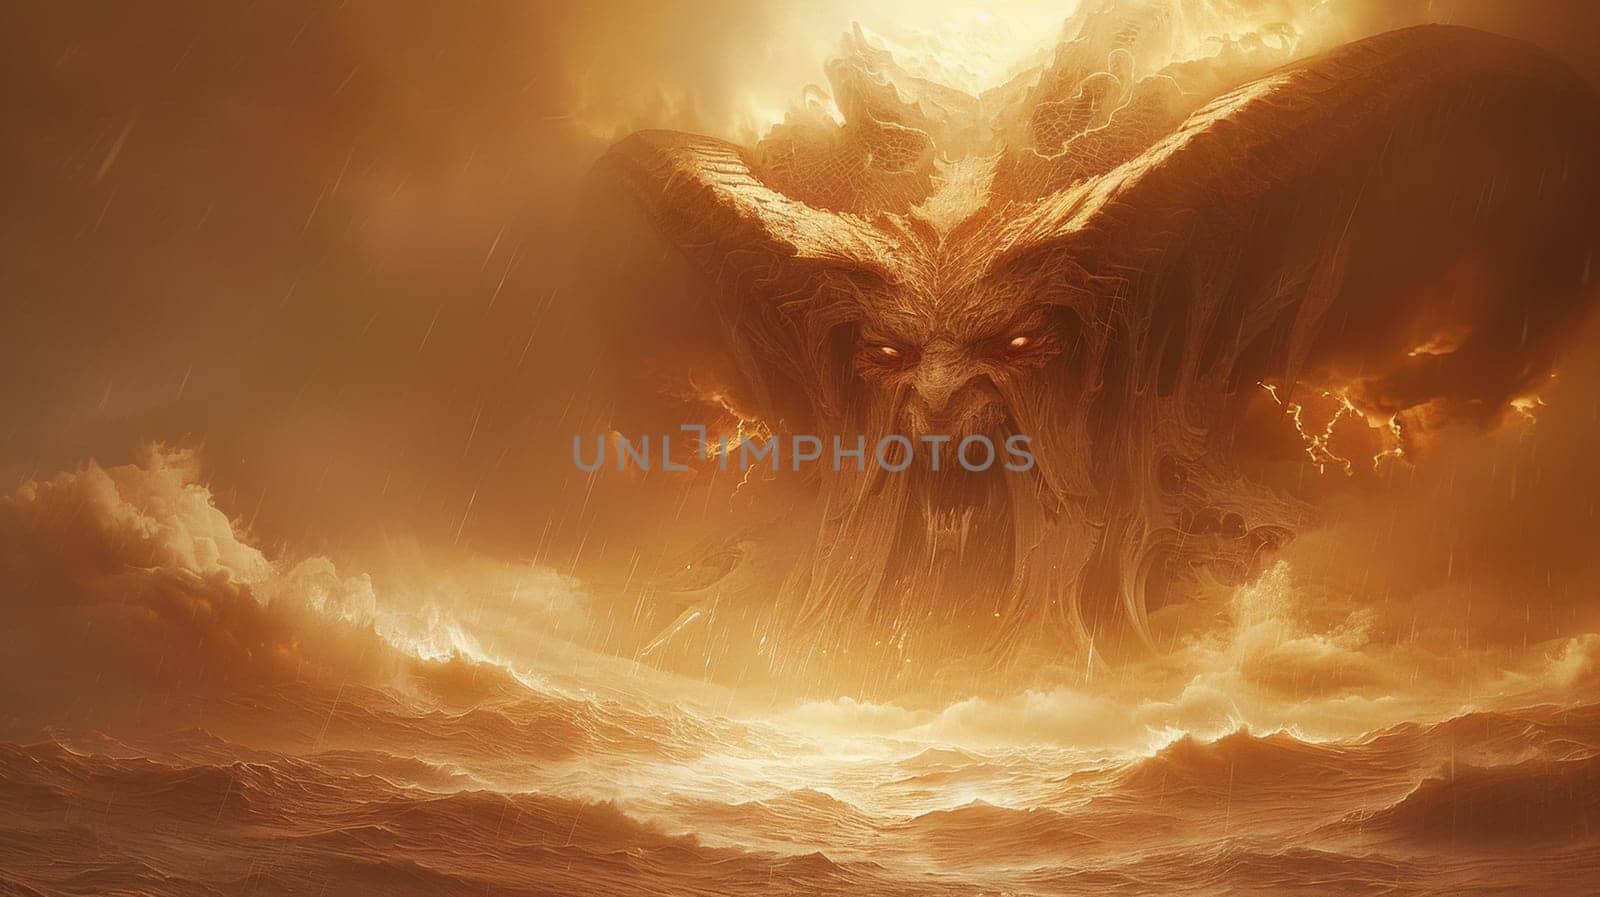 A large demon with a face of fire is standing on top of the ocean, AI by starush